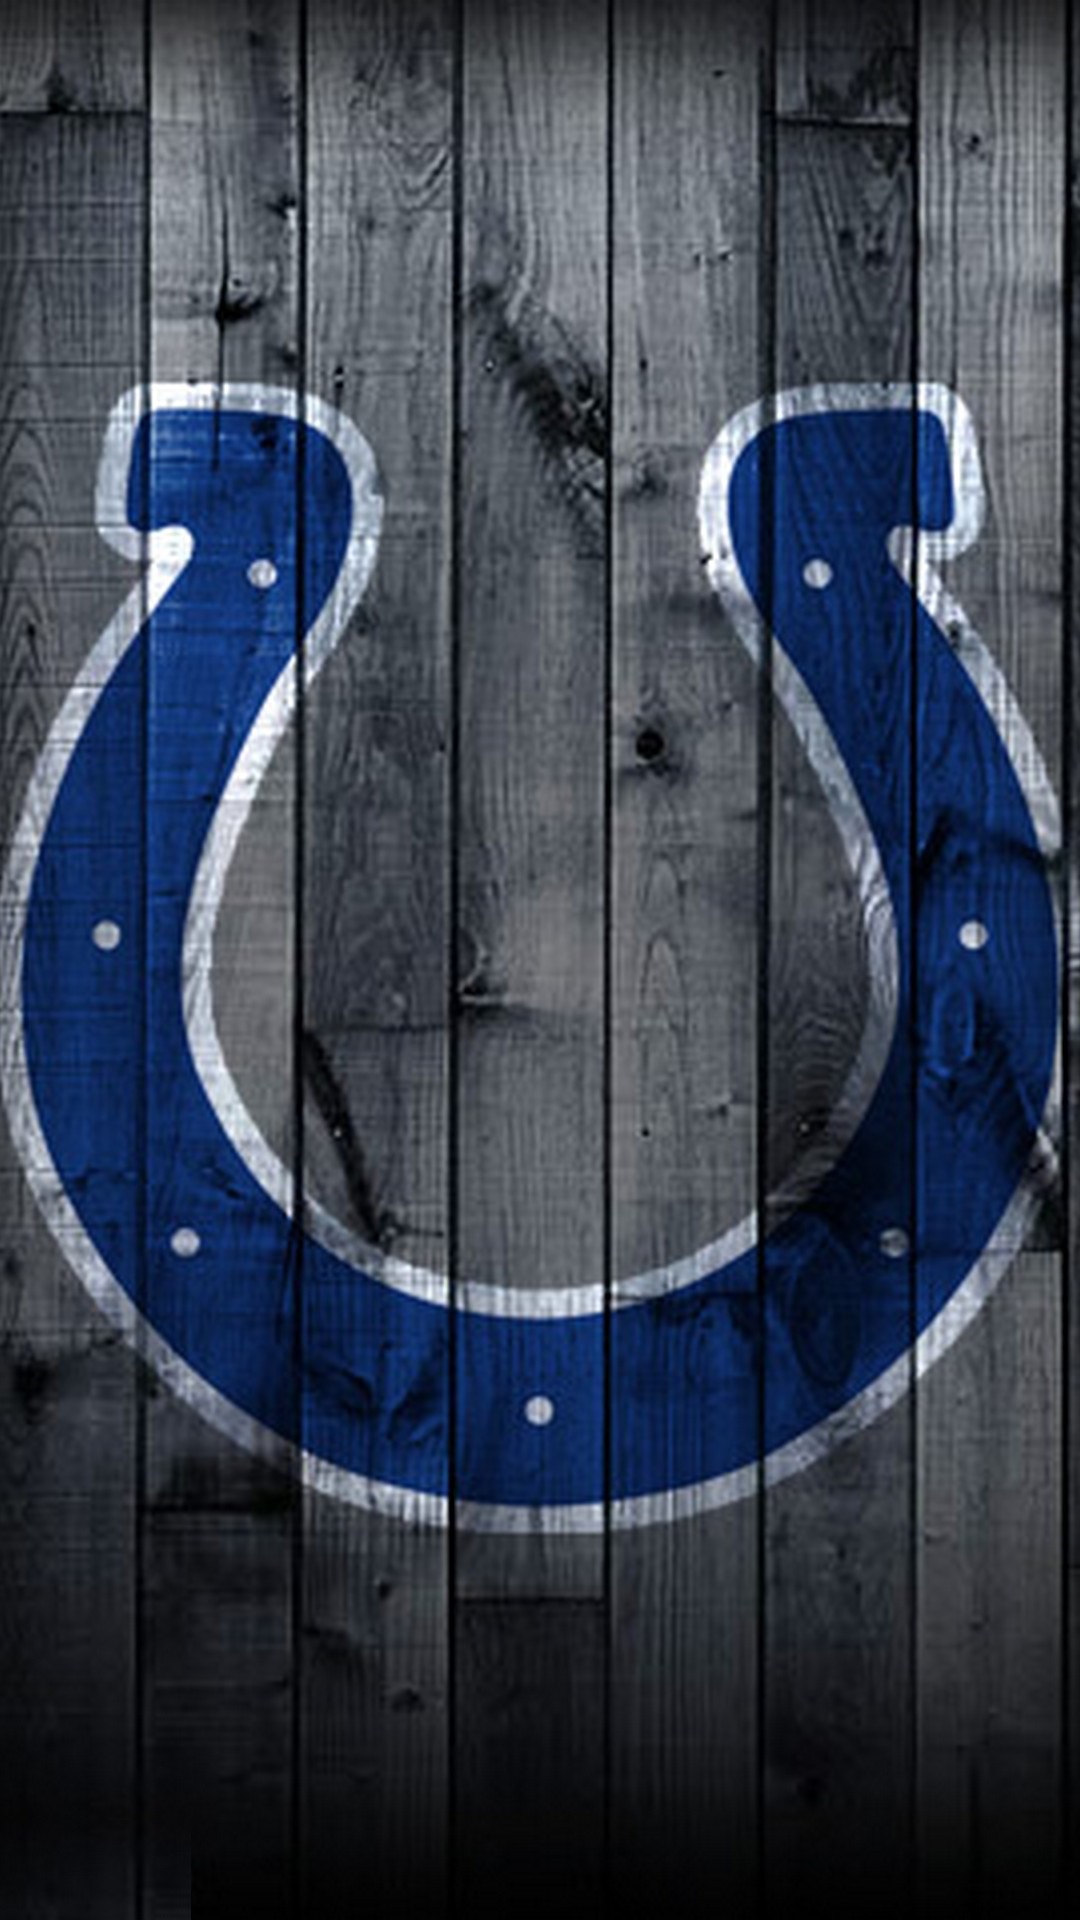 Indianapolis Colts iPhone 6s Plus Wallpaper With high-resolution 1080X1920 pixel. Download and set as wallpaper for Desktop Computer, Apple iPhone X, XS Max, XR, 8, 7, 6, SE, iPad, Android